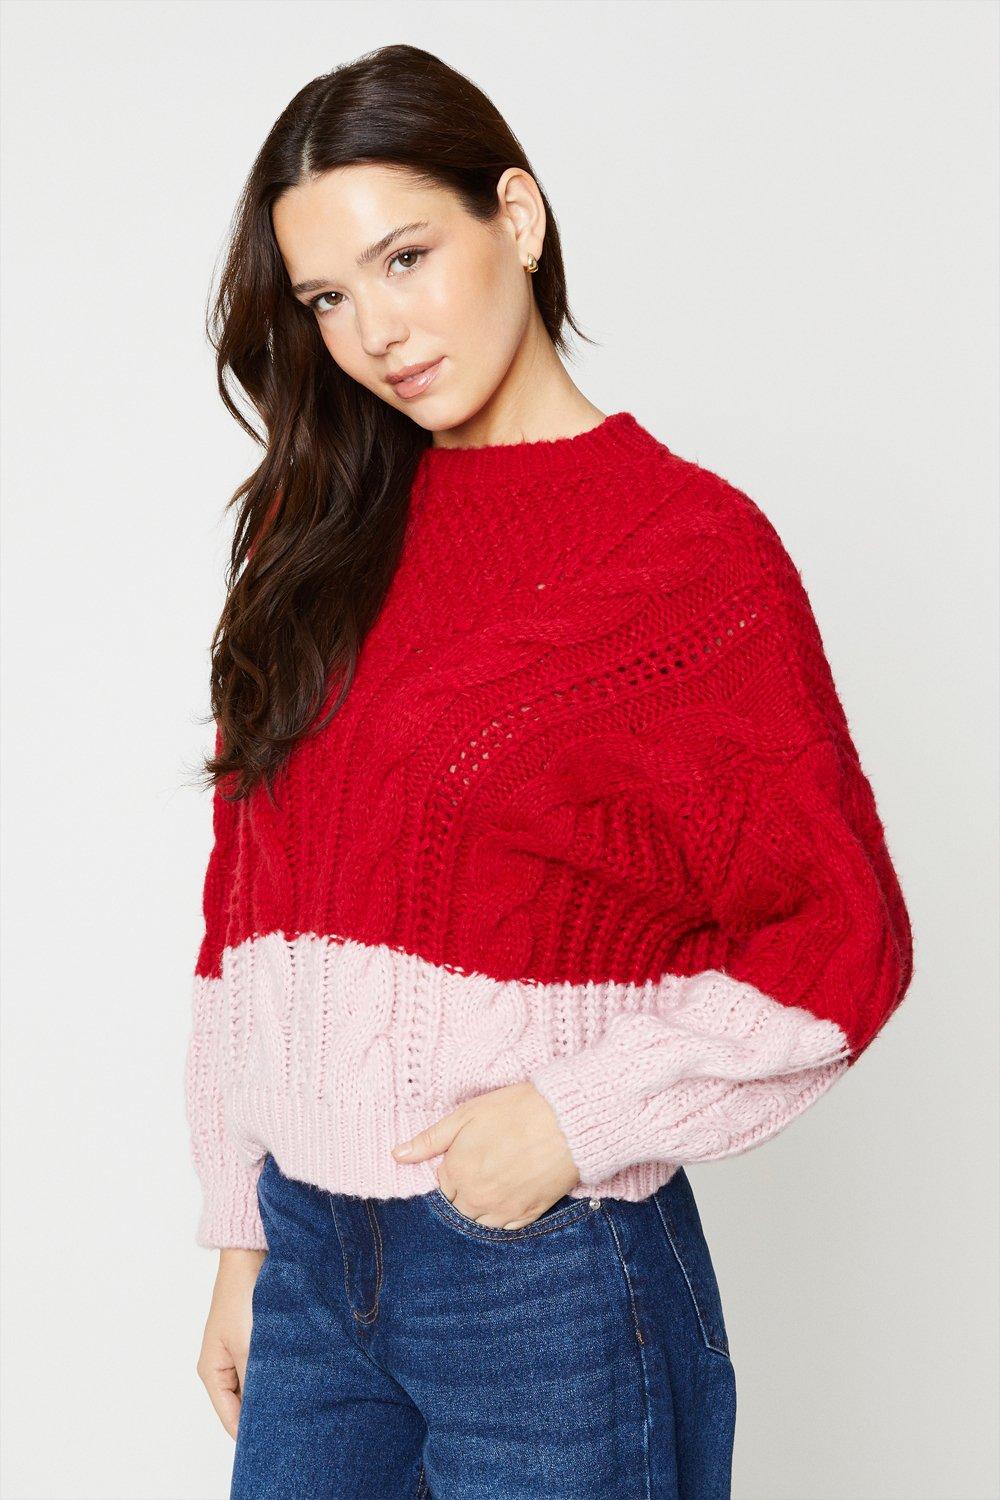 Women's Long Sleeve Colour Block Cable Knitted Jumper - red - XL